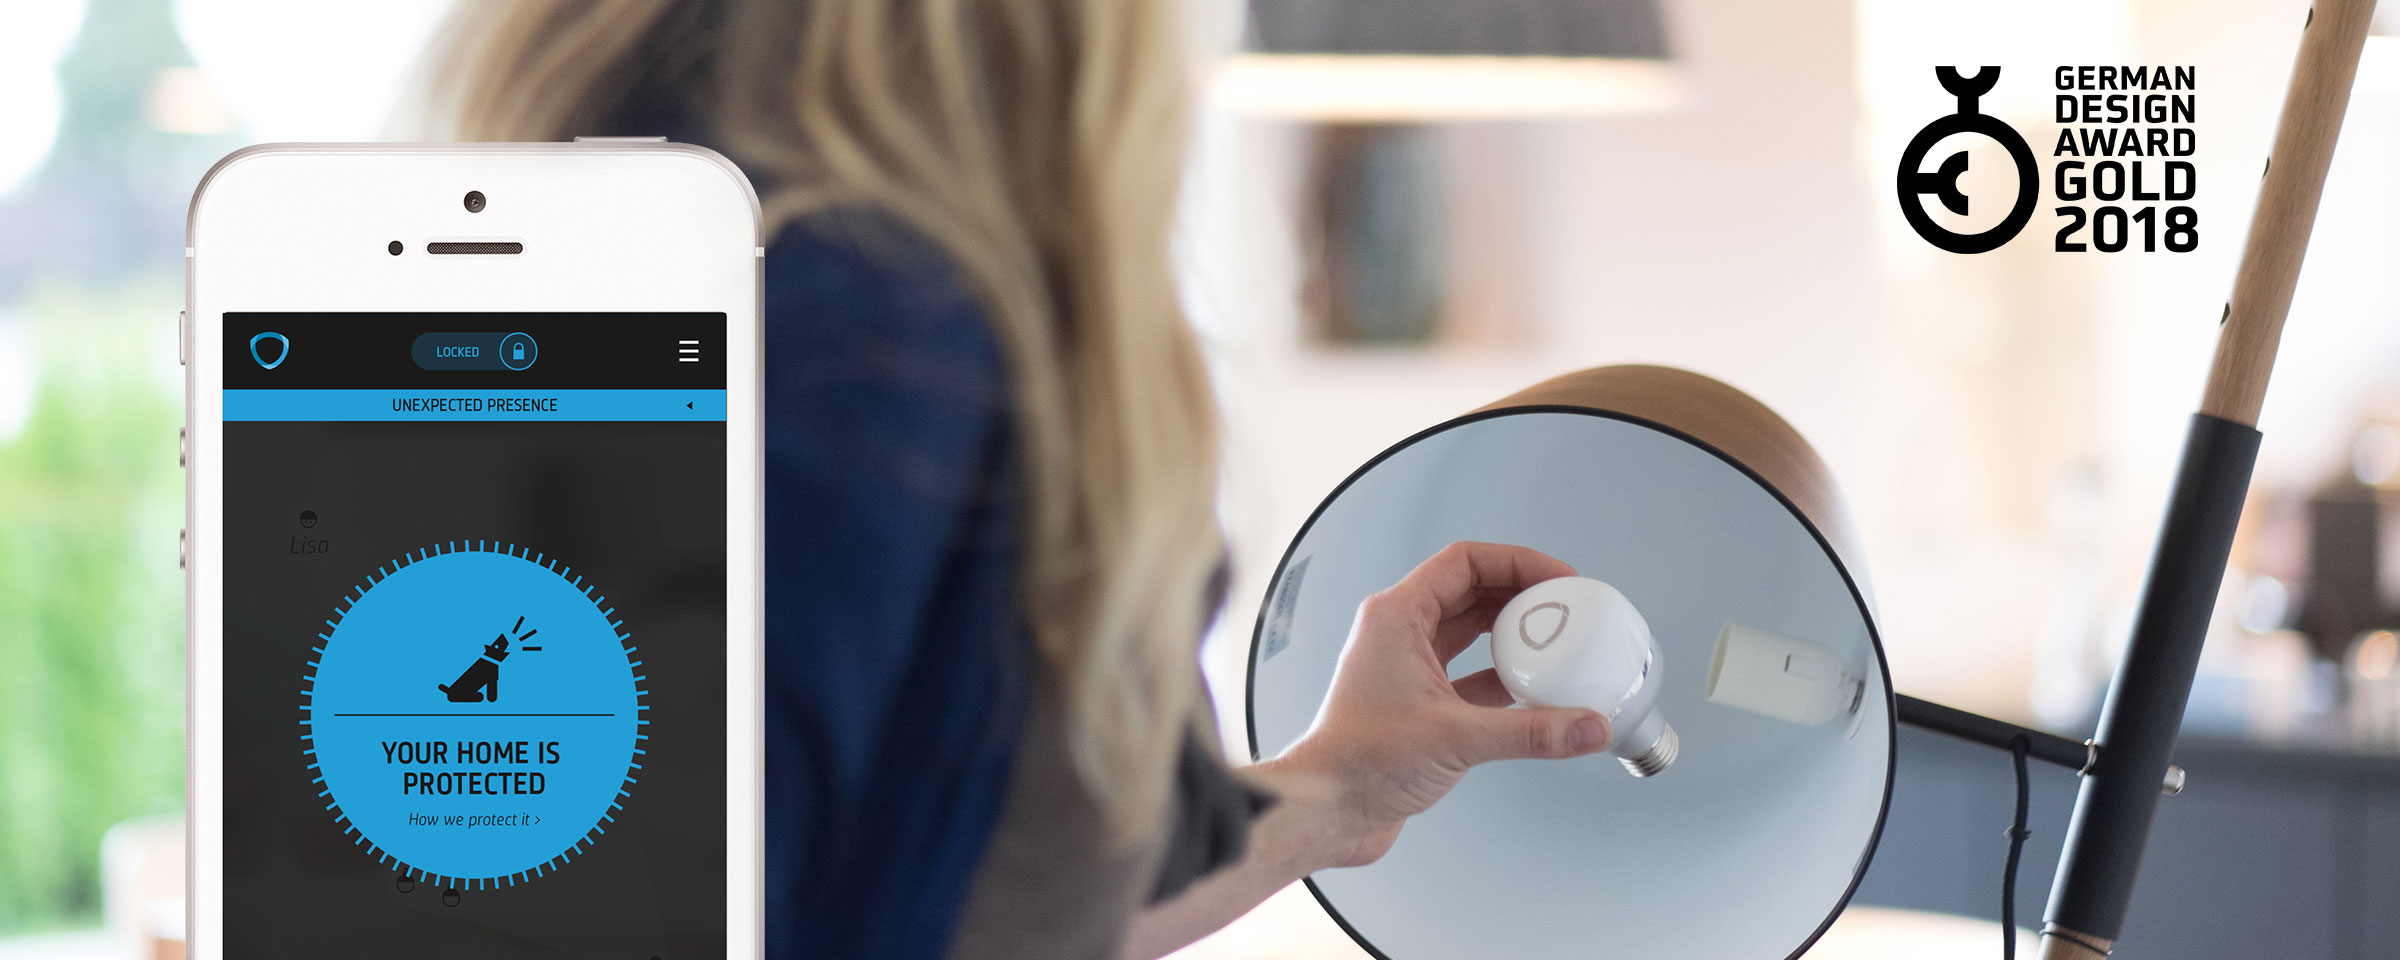 ComfyApp shows the security solution application and an intelligent light bulb mounted in a lamp socket